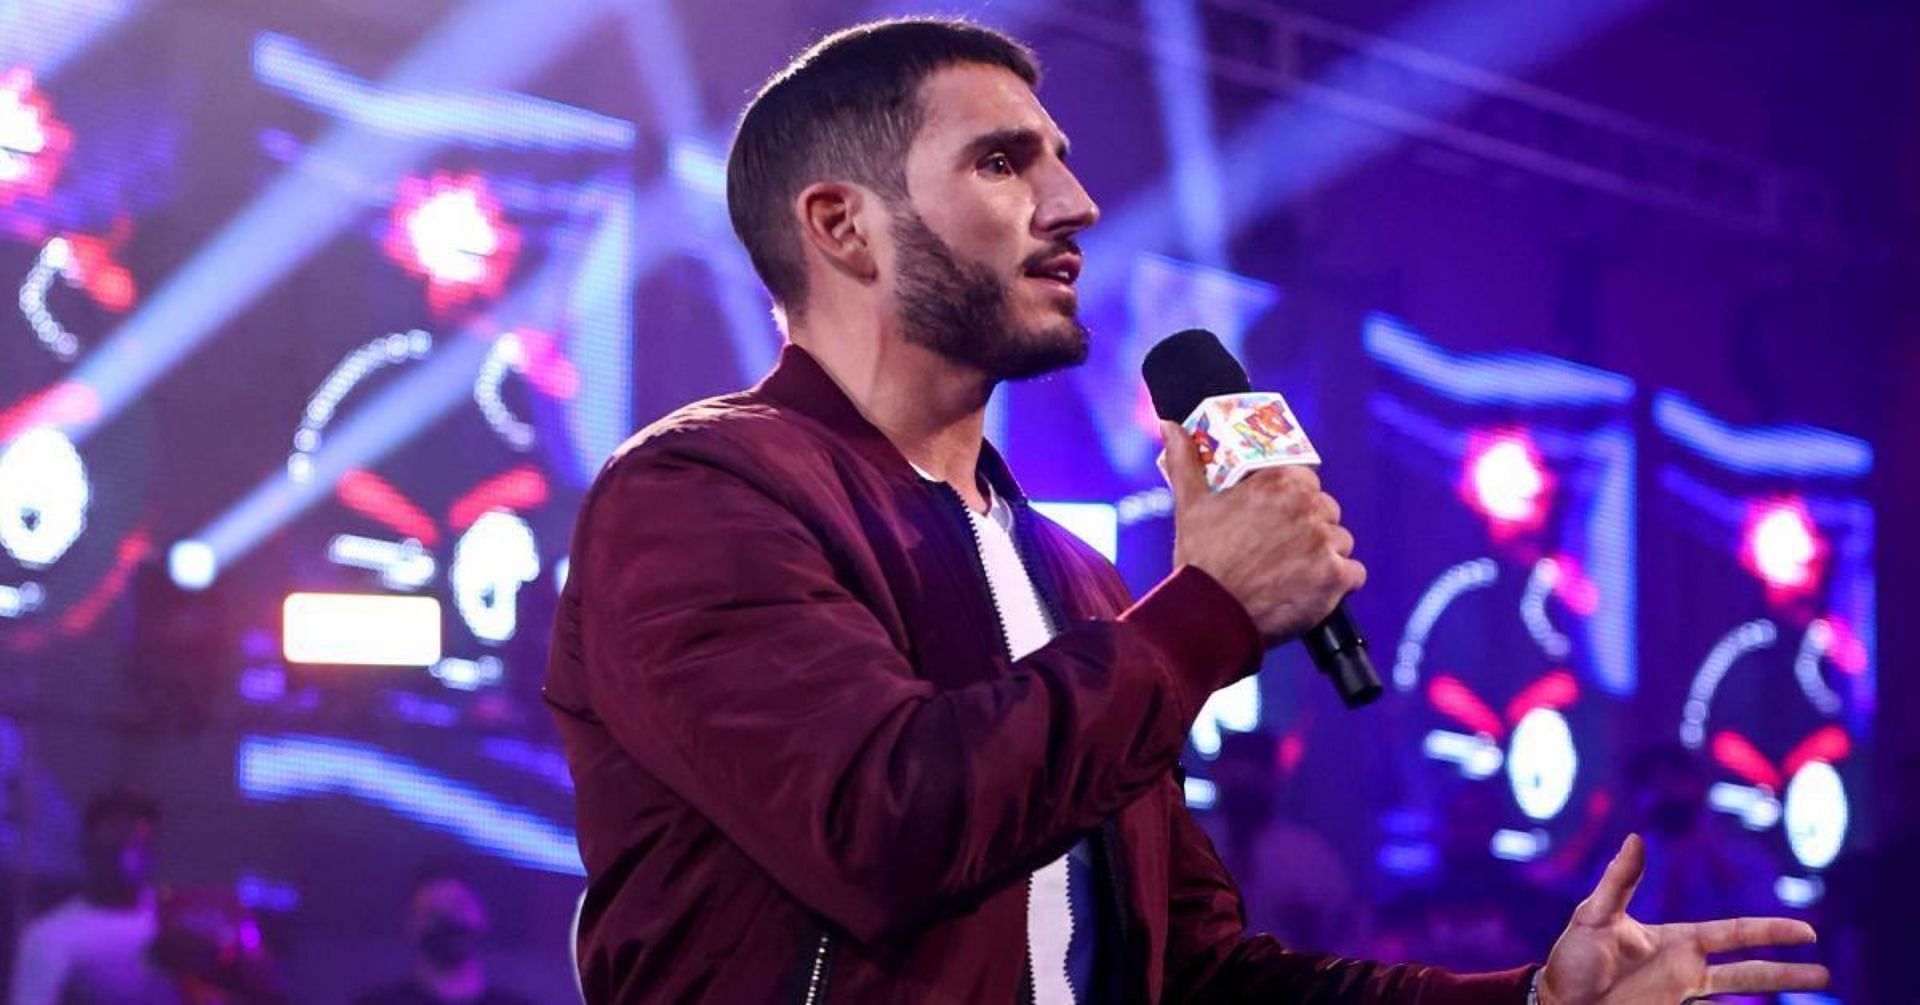 Johnny Gargano has revealed more about his decision to leave WWE.